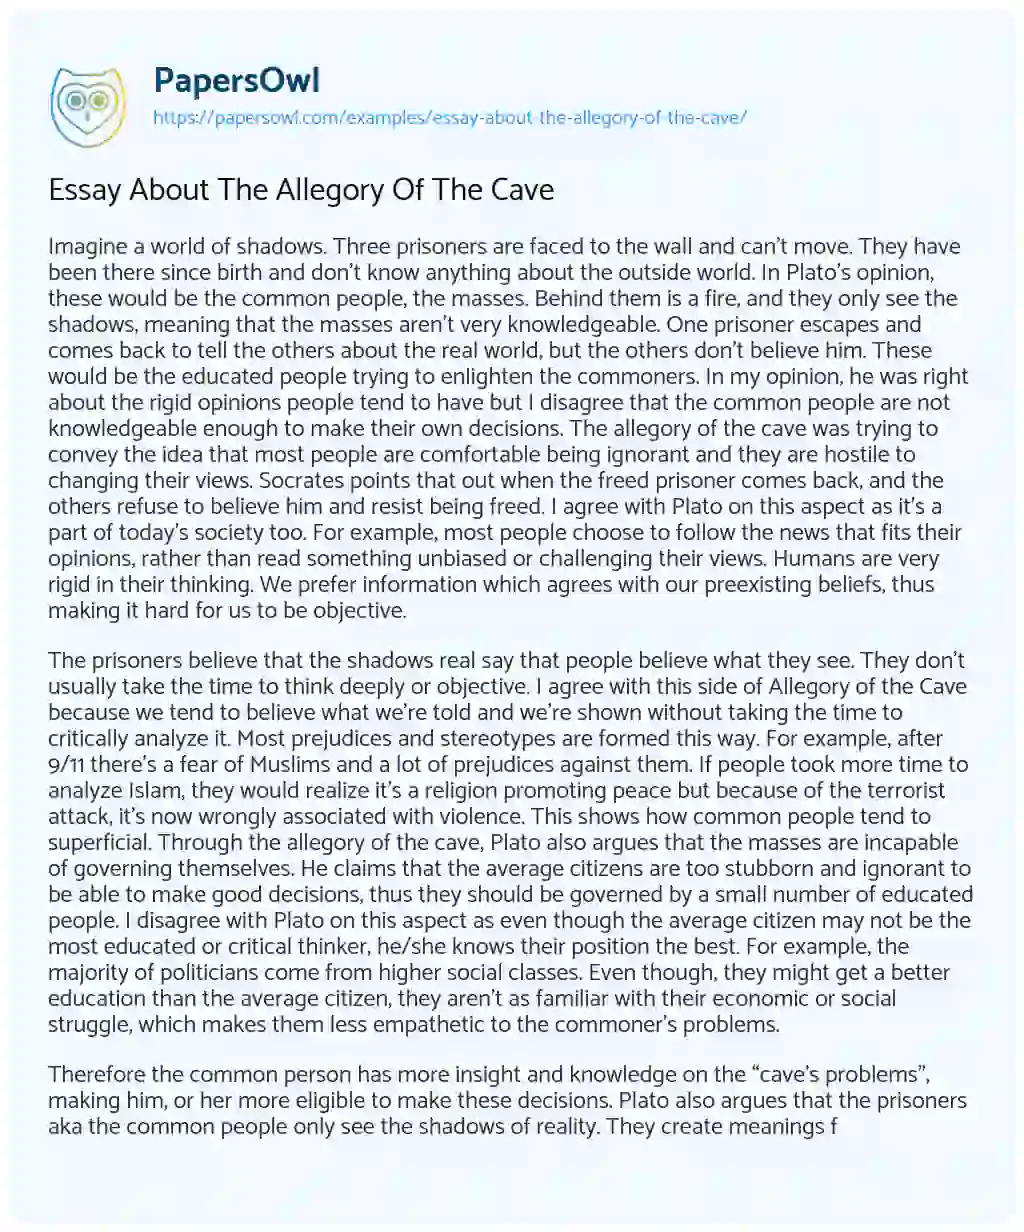 Essay on Essay about the Allegory of the Cave